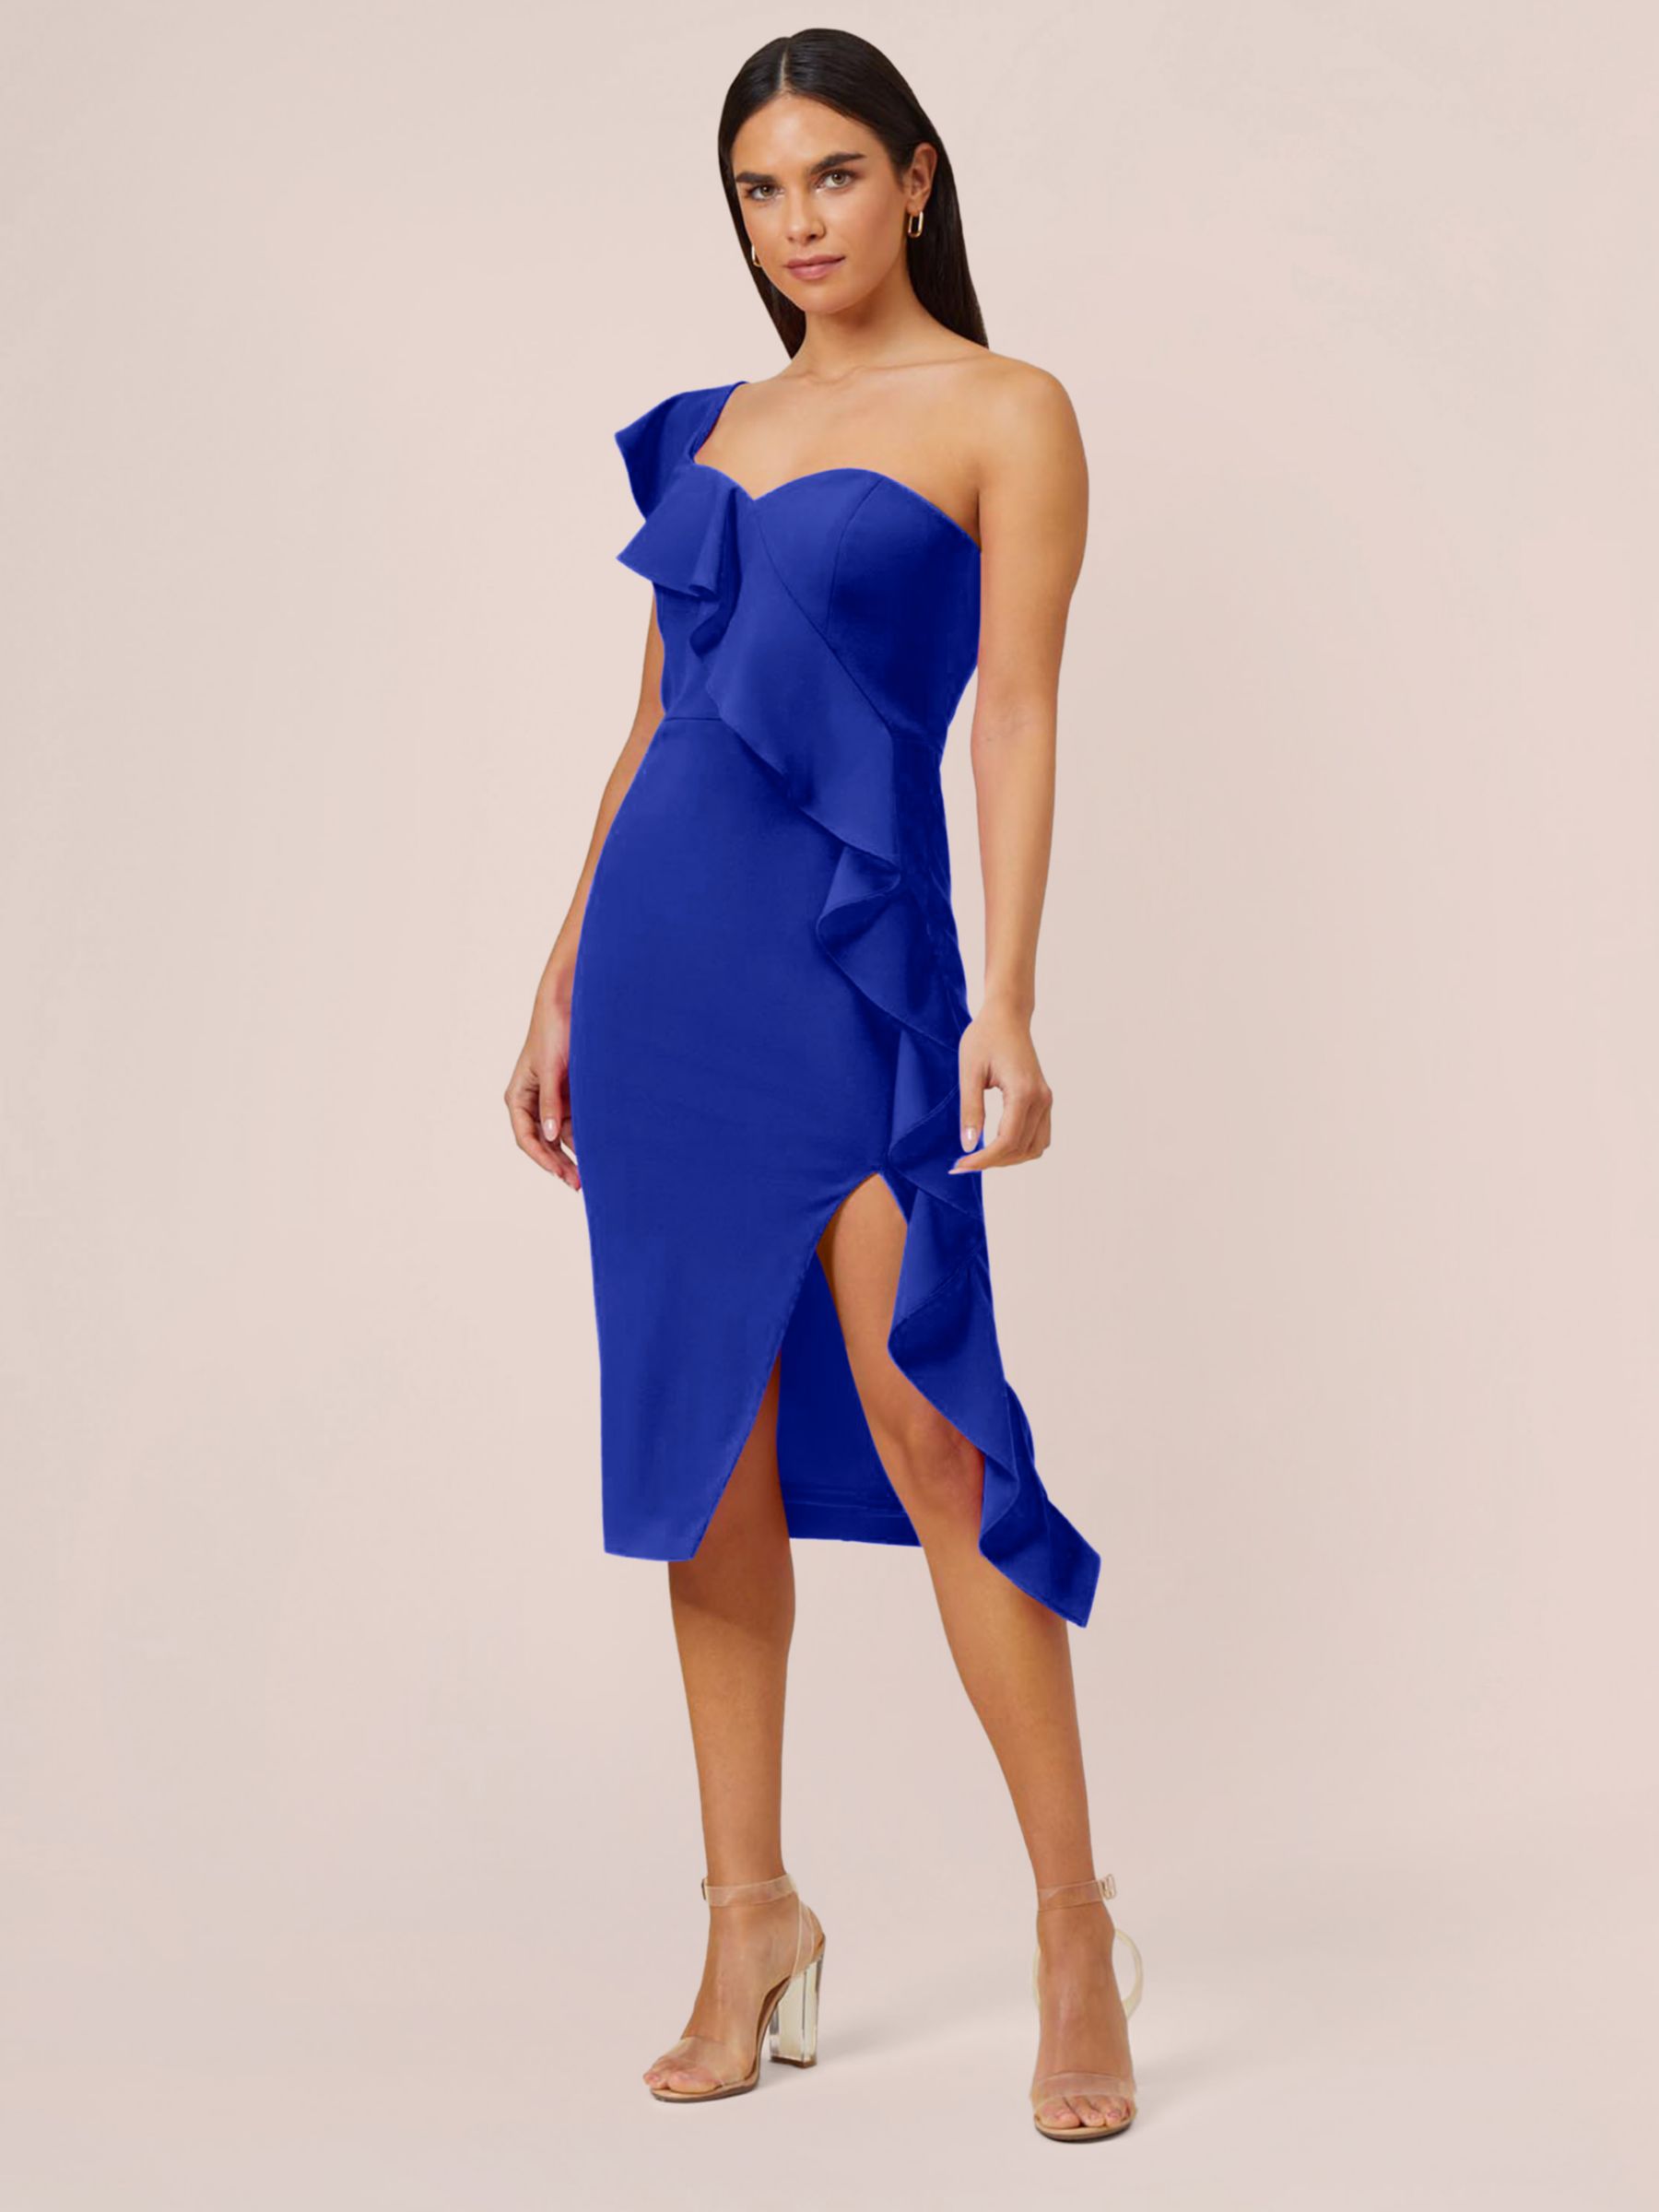 Aidan by Adrianna Papell Knit Crepe Cocktail Dress, Royal Sapphire, 6